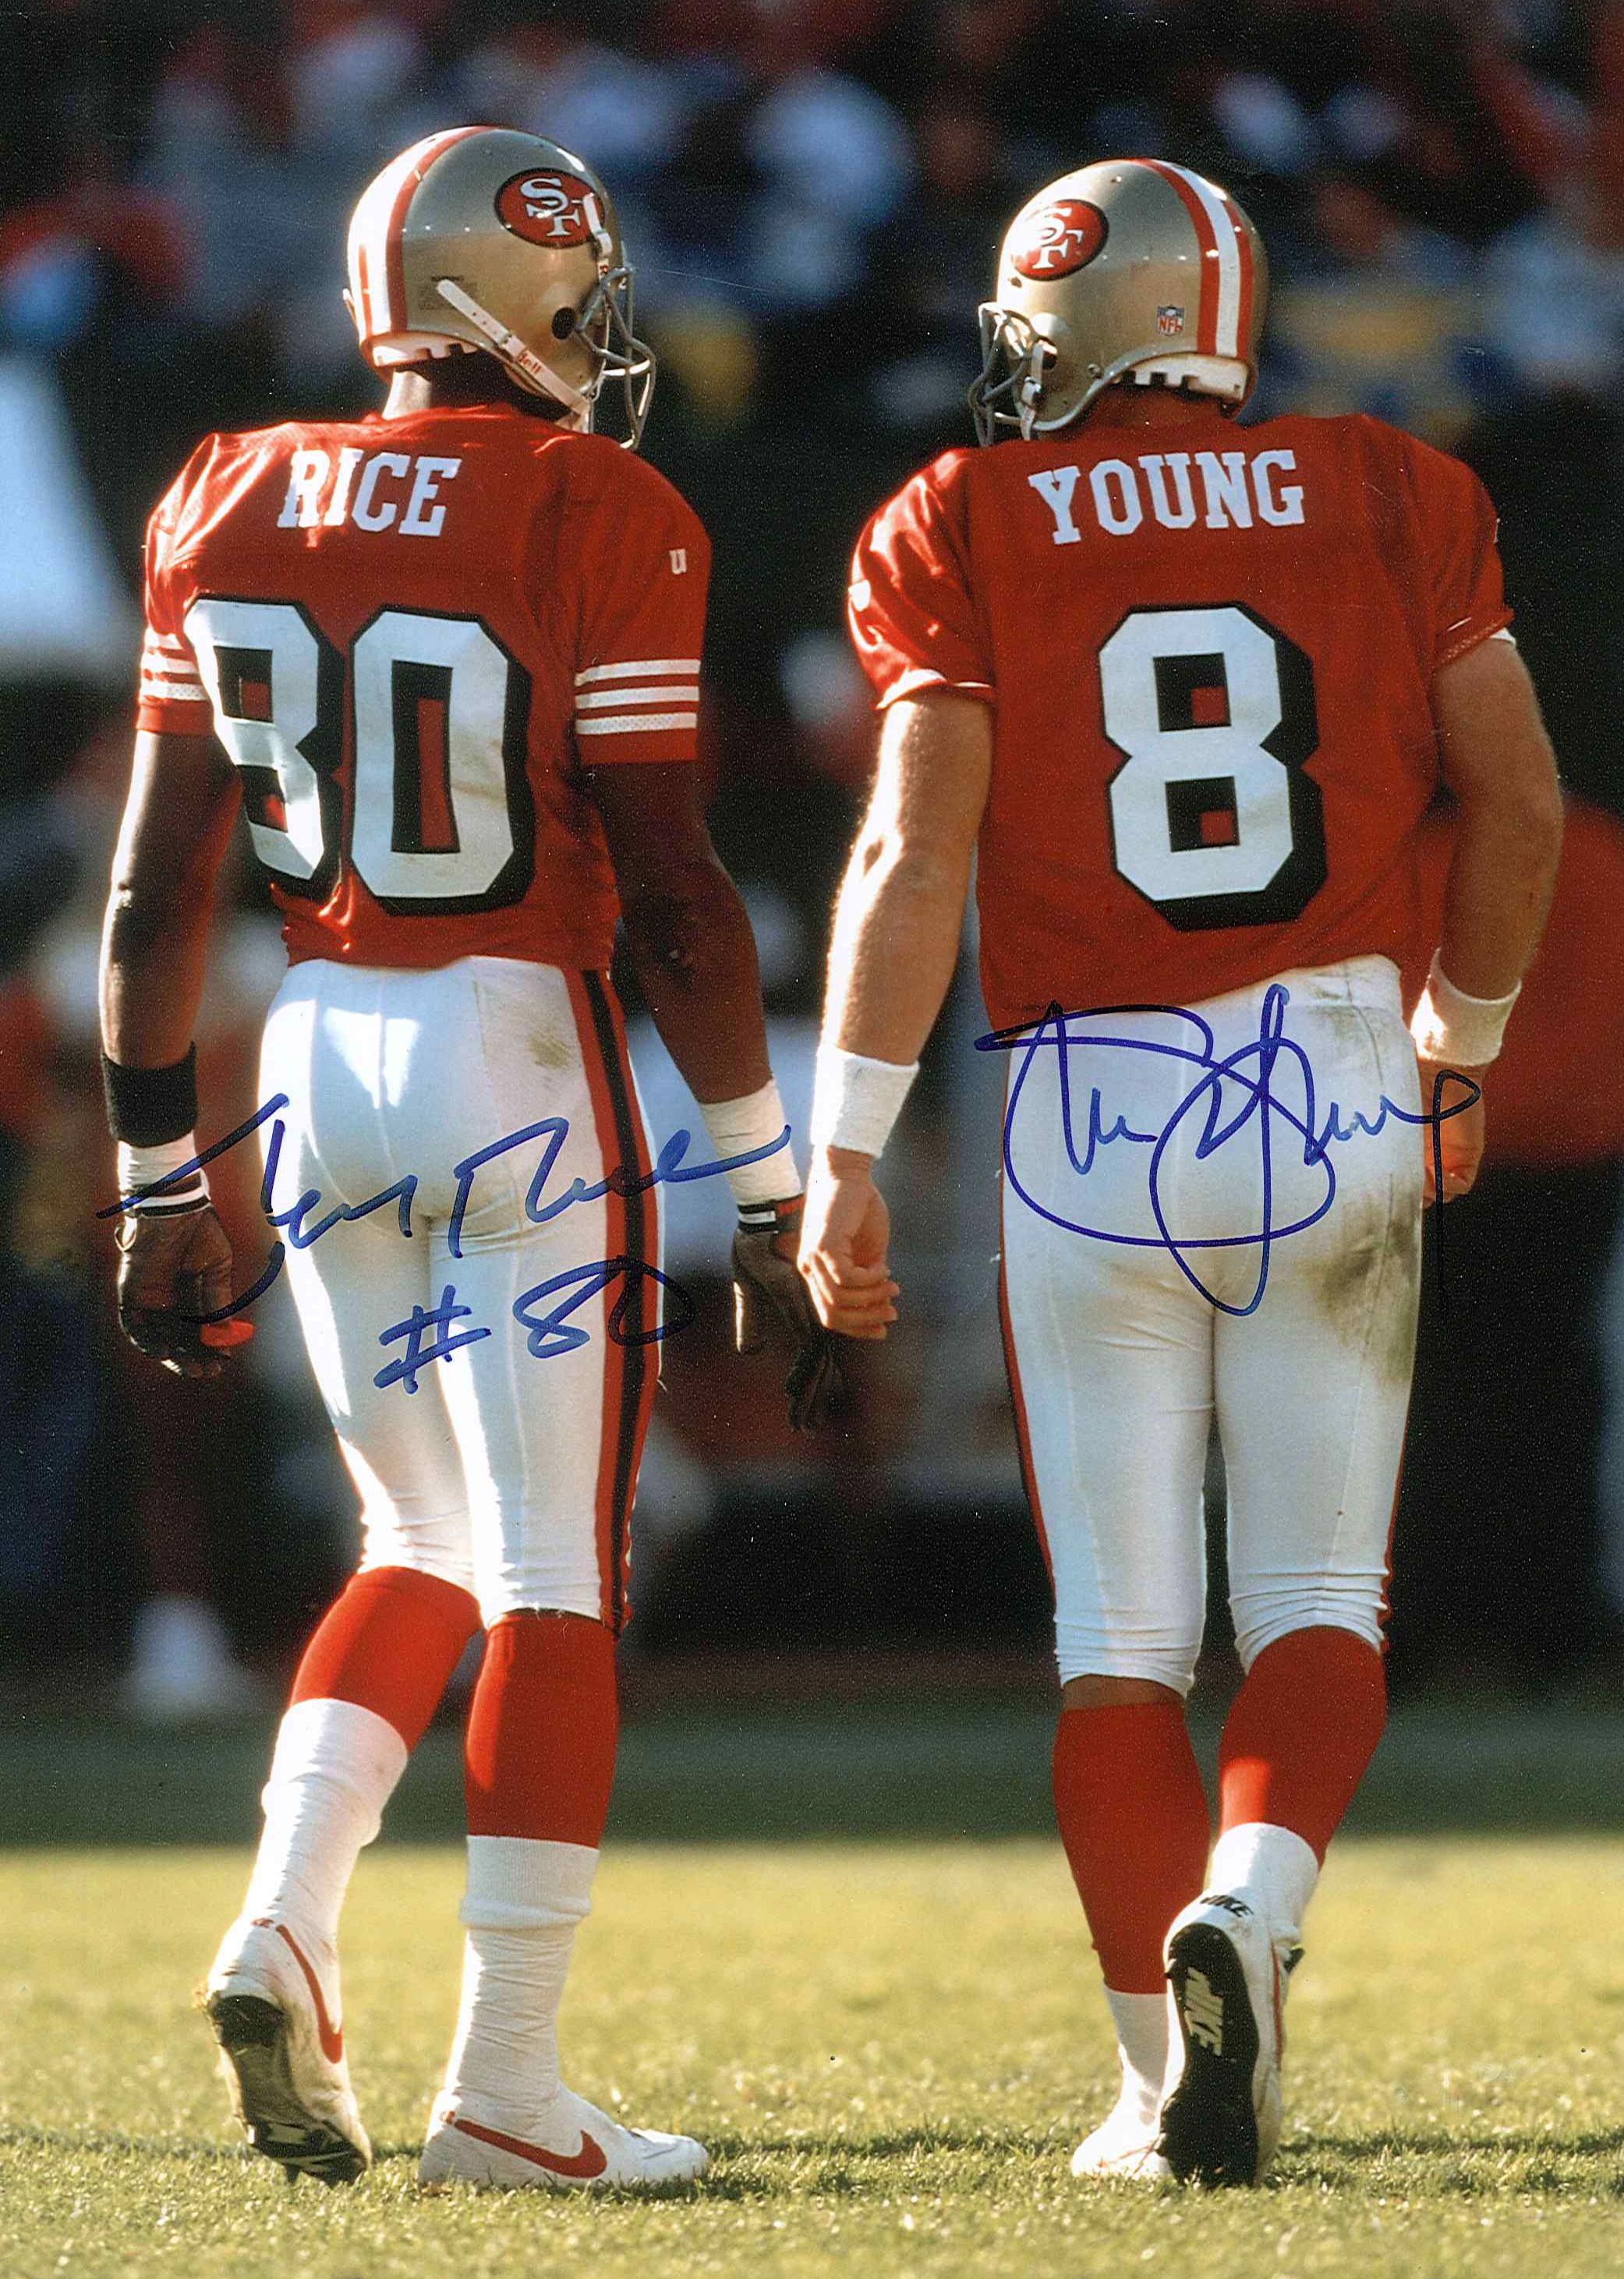 steve young 1994 jersey